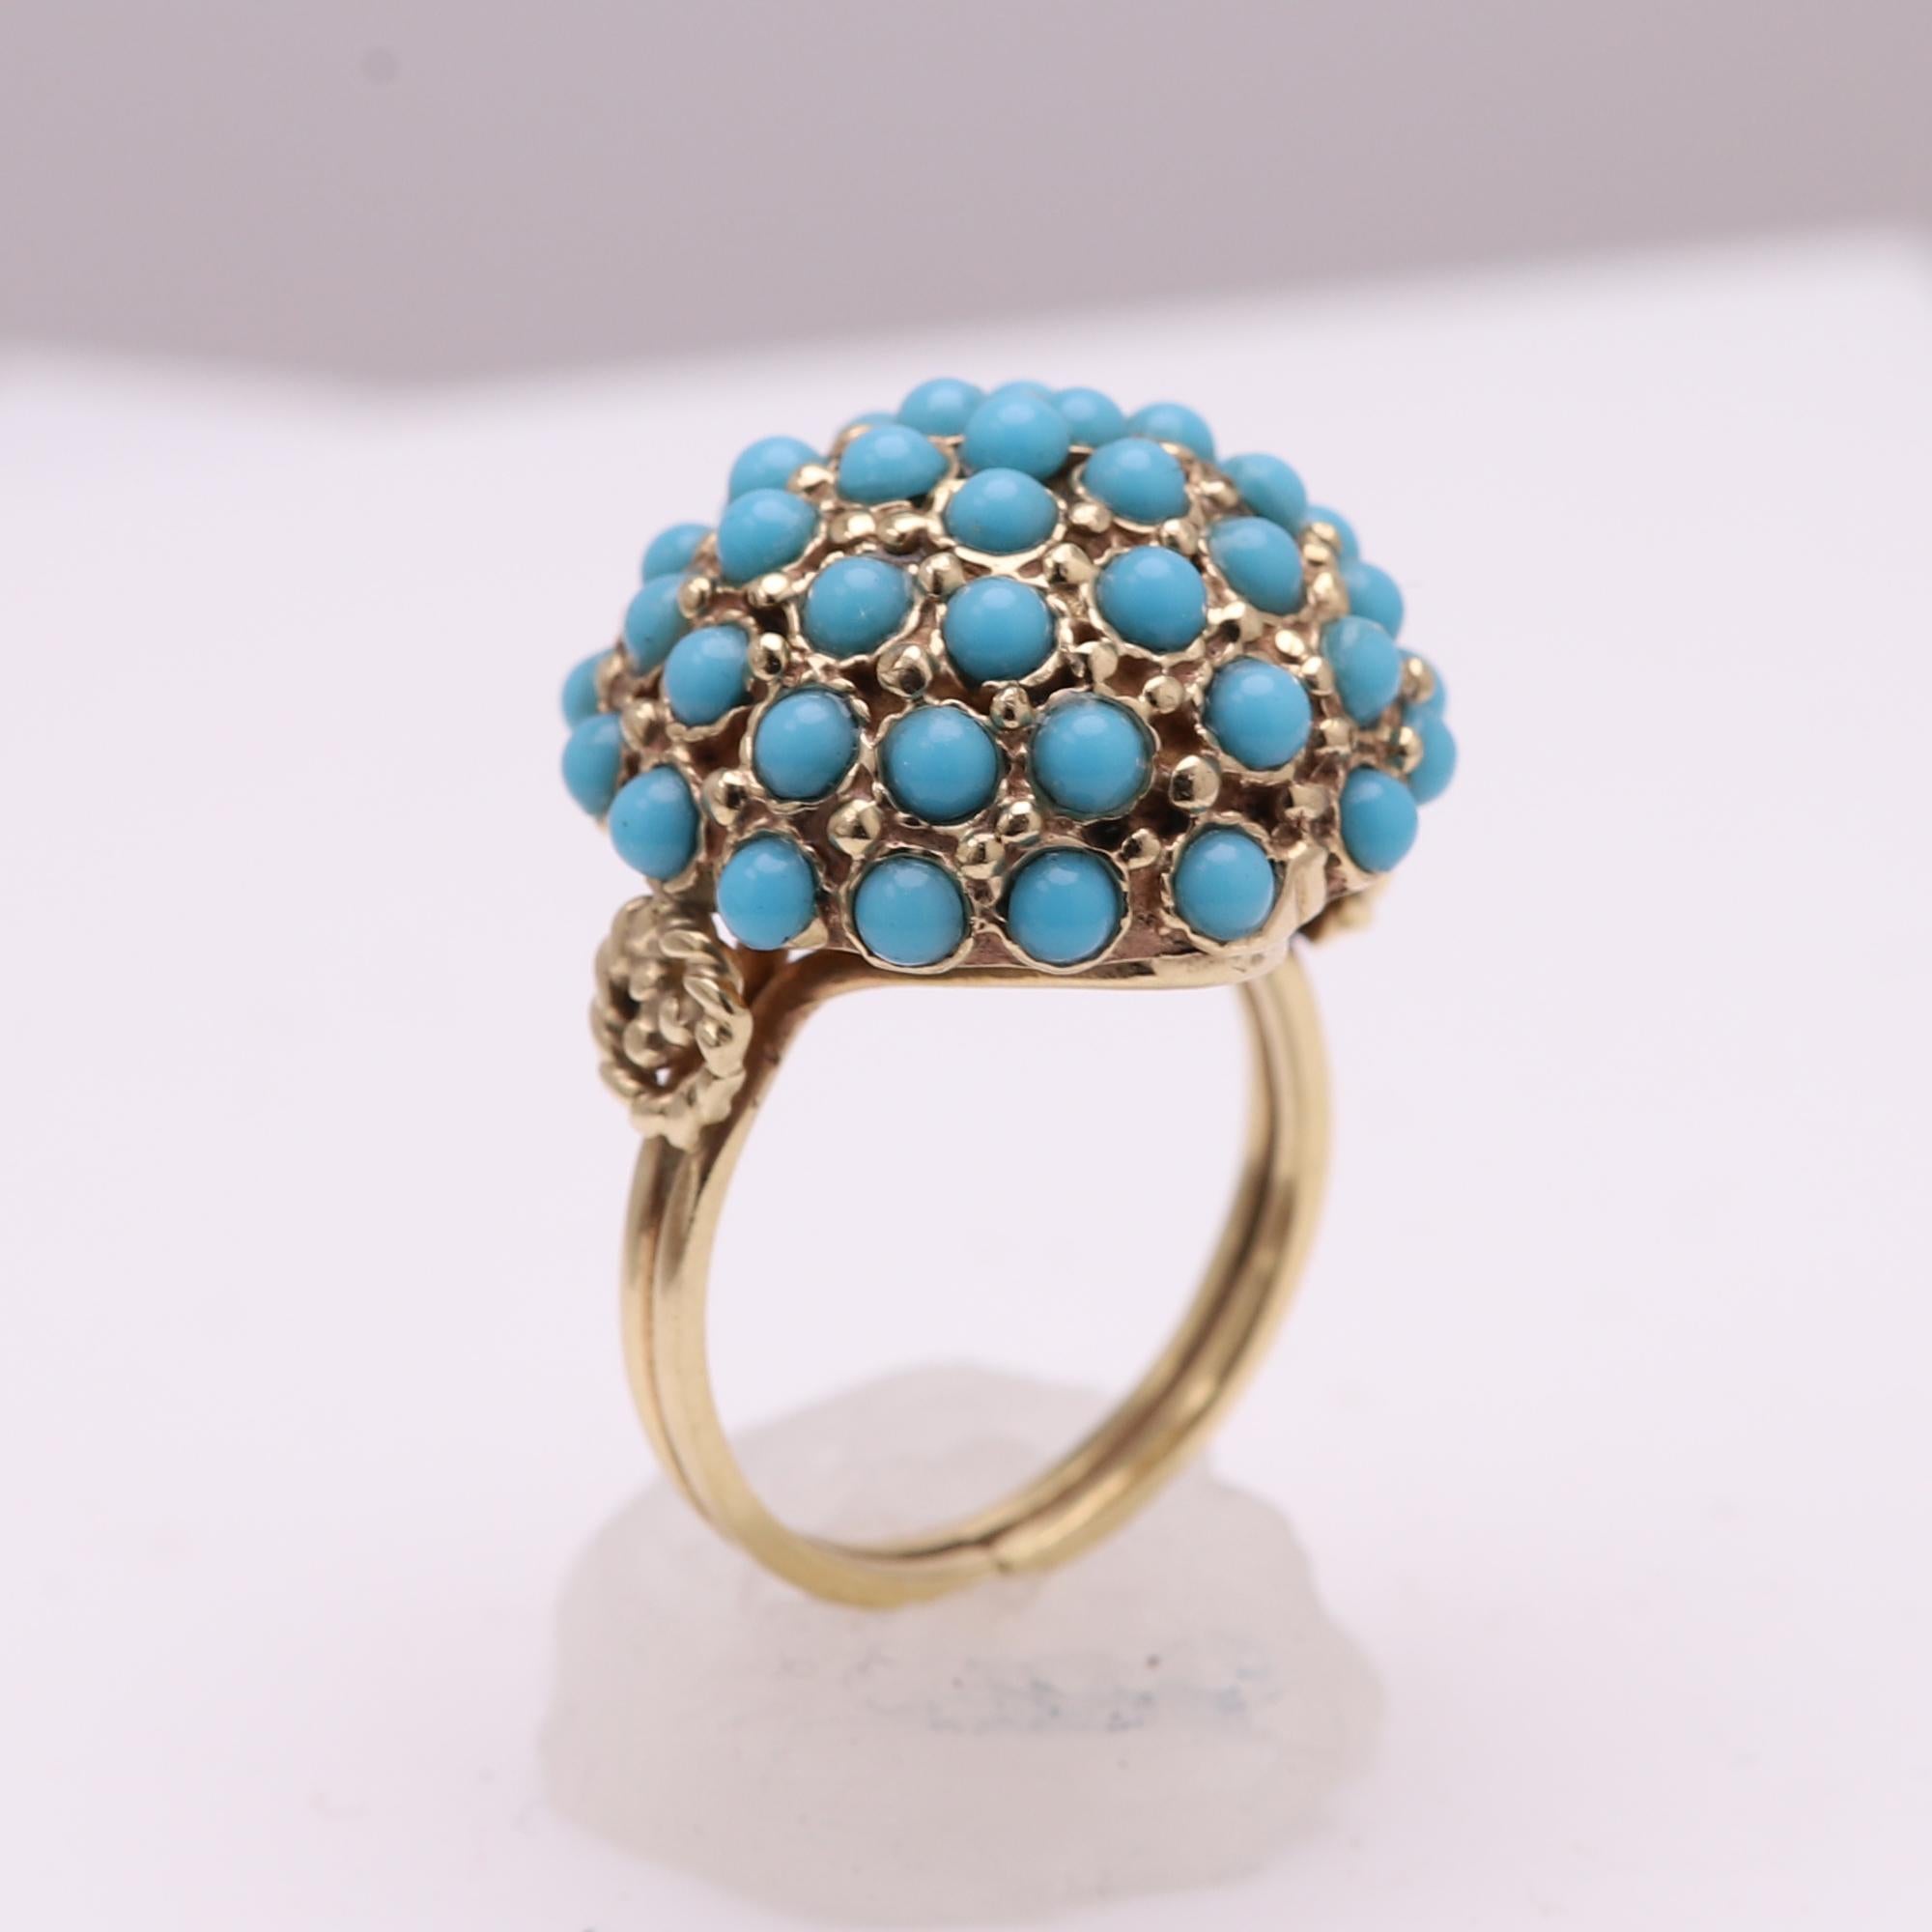 Circa 1940-1950 Turquoise Ring
pre-own in great condition 
unique cluster dome shape
with small round Persian Turquoise.
14k Yellow Gold  8.7 grams
Finger Size 7
Overall design size approx 20  in diameter.